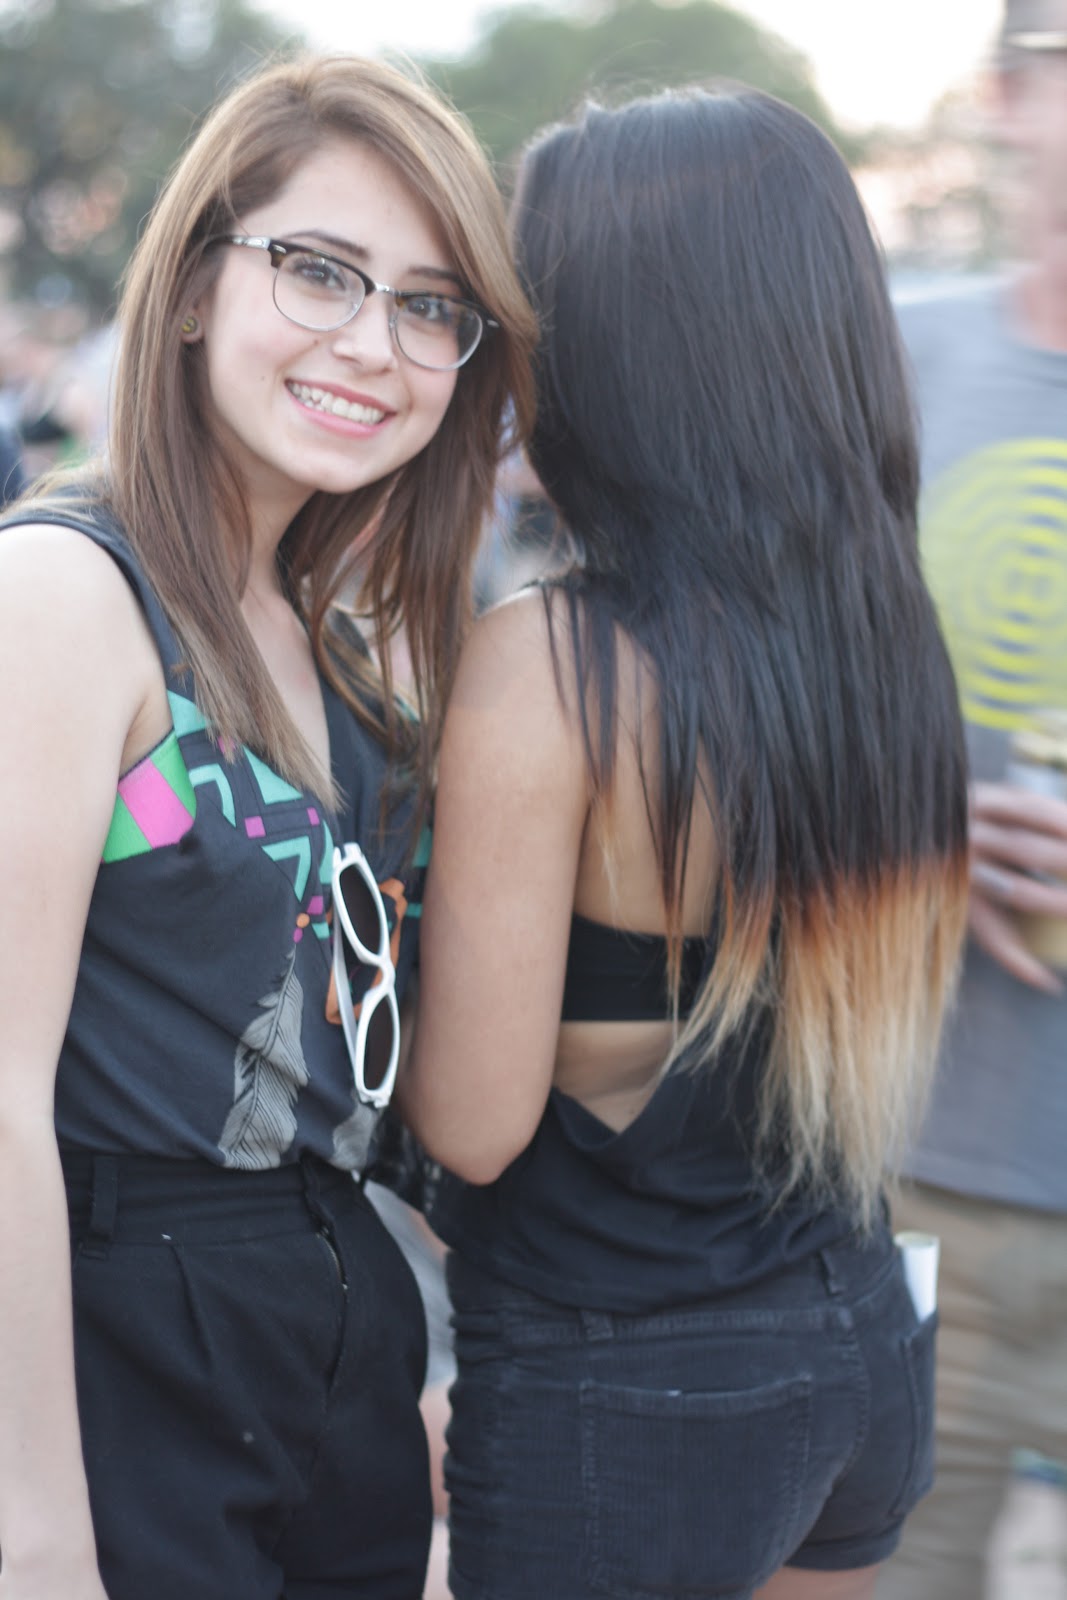 two girls, one with bleach dipped hair, at sxsw